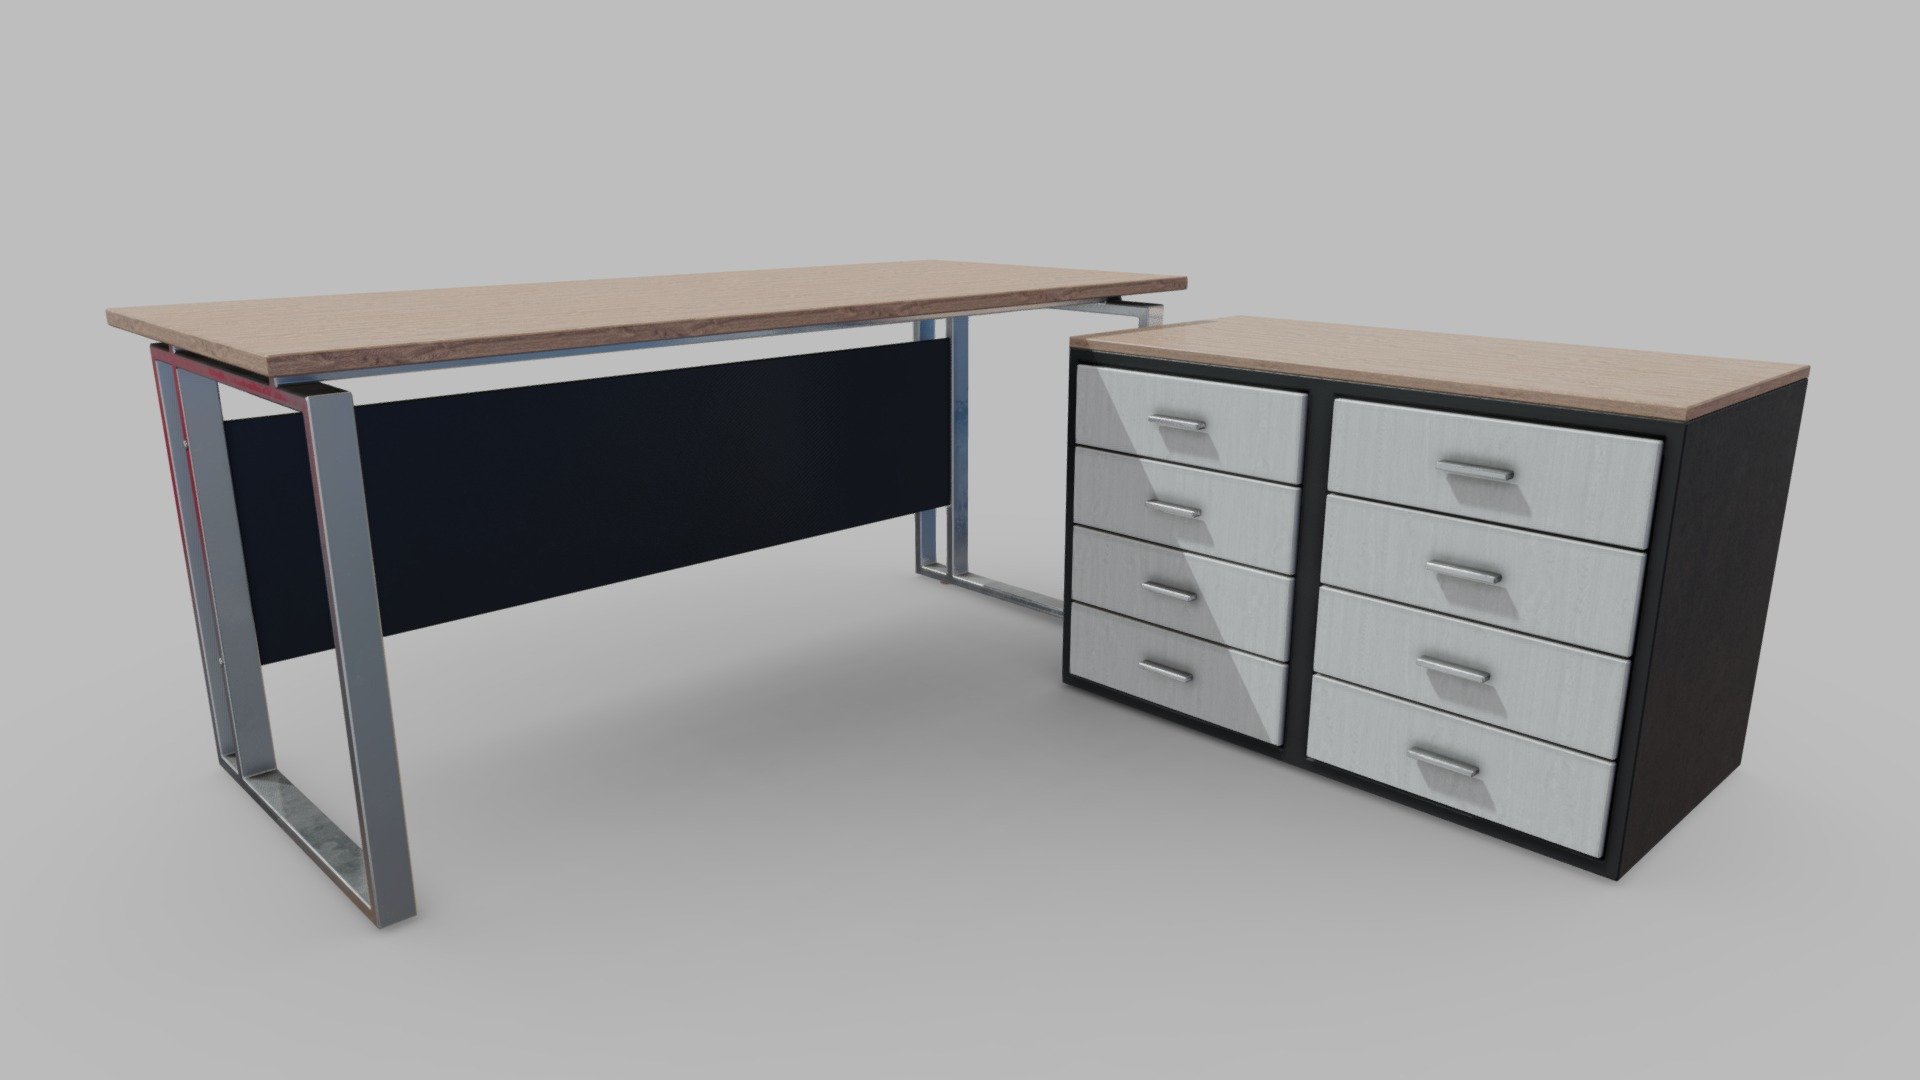 Desk 3D model with PBR maps 4096x4096 such as: • BaseColor • Metallic • Roughness • Glossiness • Ambient Occlusion • NormalDirectX •
Model in real scale (meters) - Desk lowpoly Low-poly 3D model - Buy Royalty Free 3D model by Andrew.Maria 3d model